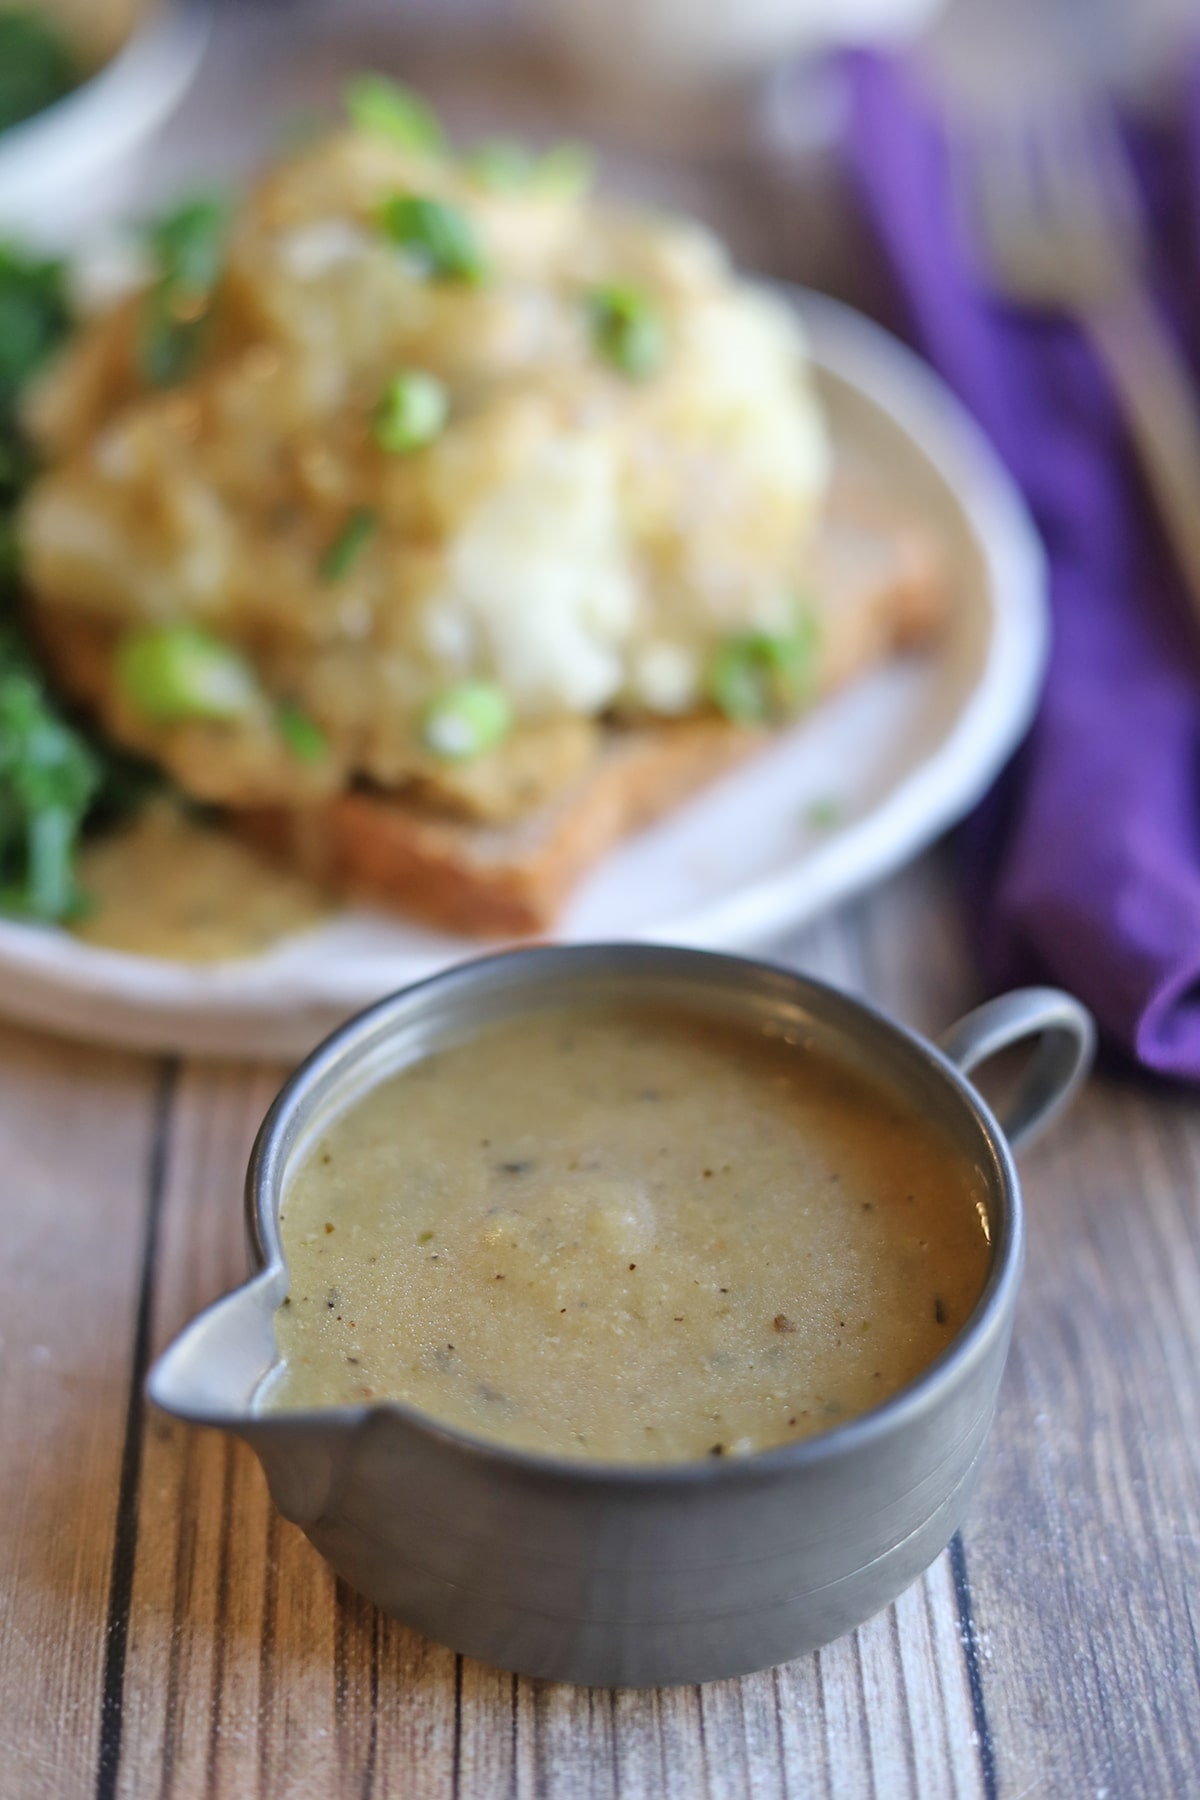 Gravy in small pitcher in front of plate.